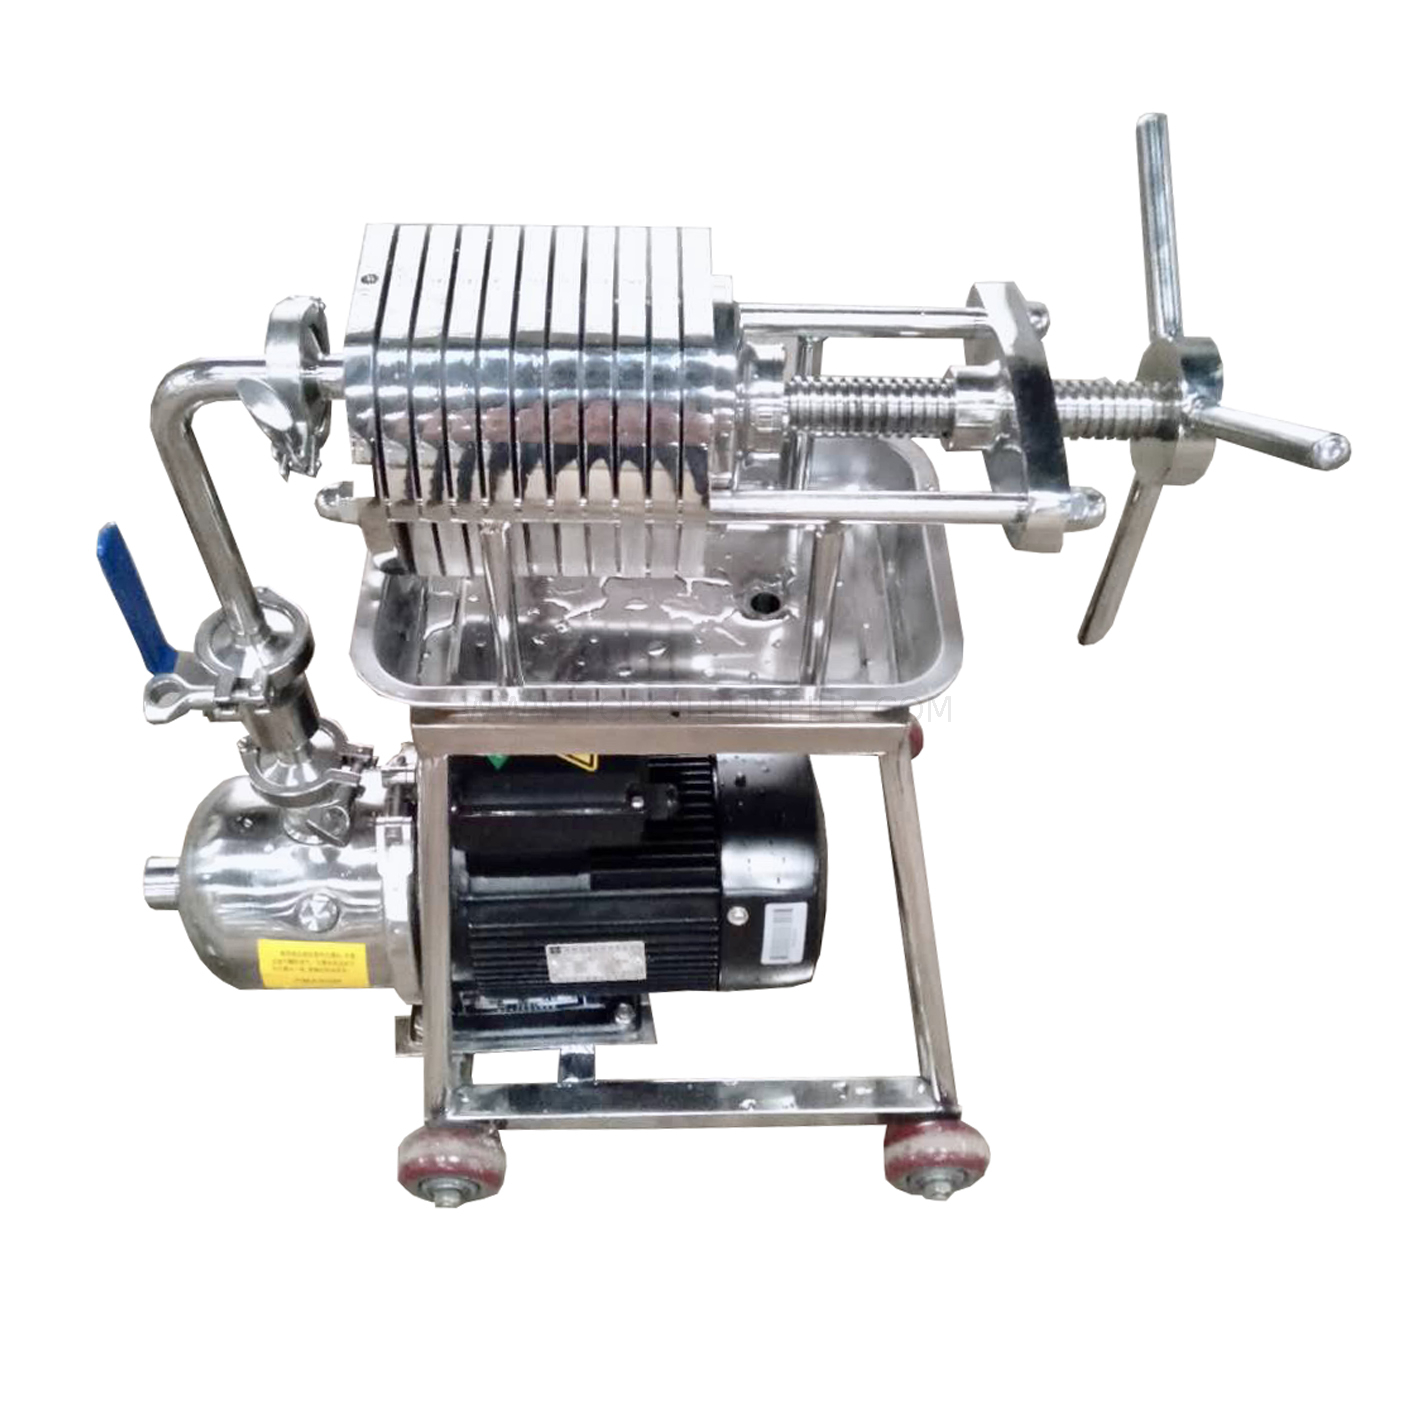 Series BAS Portable Type Stainless Steel Filter Press